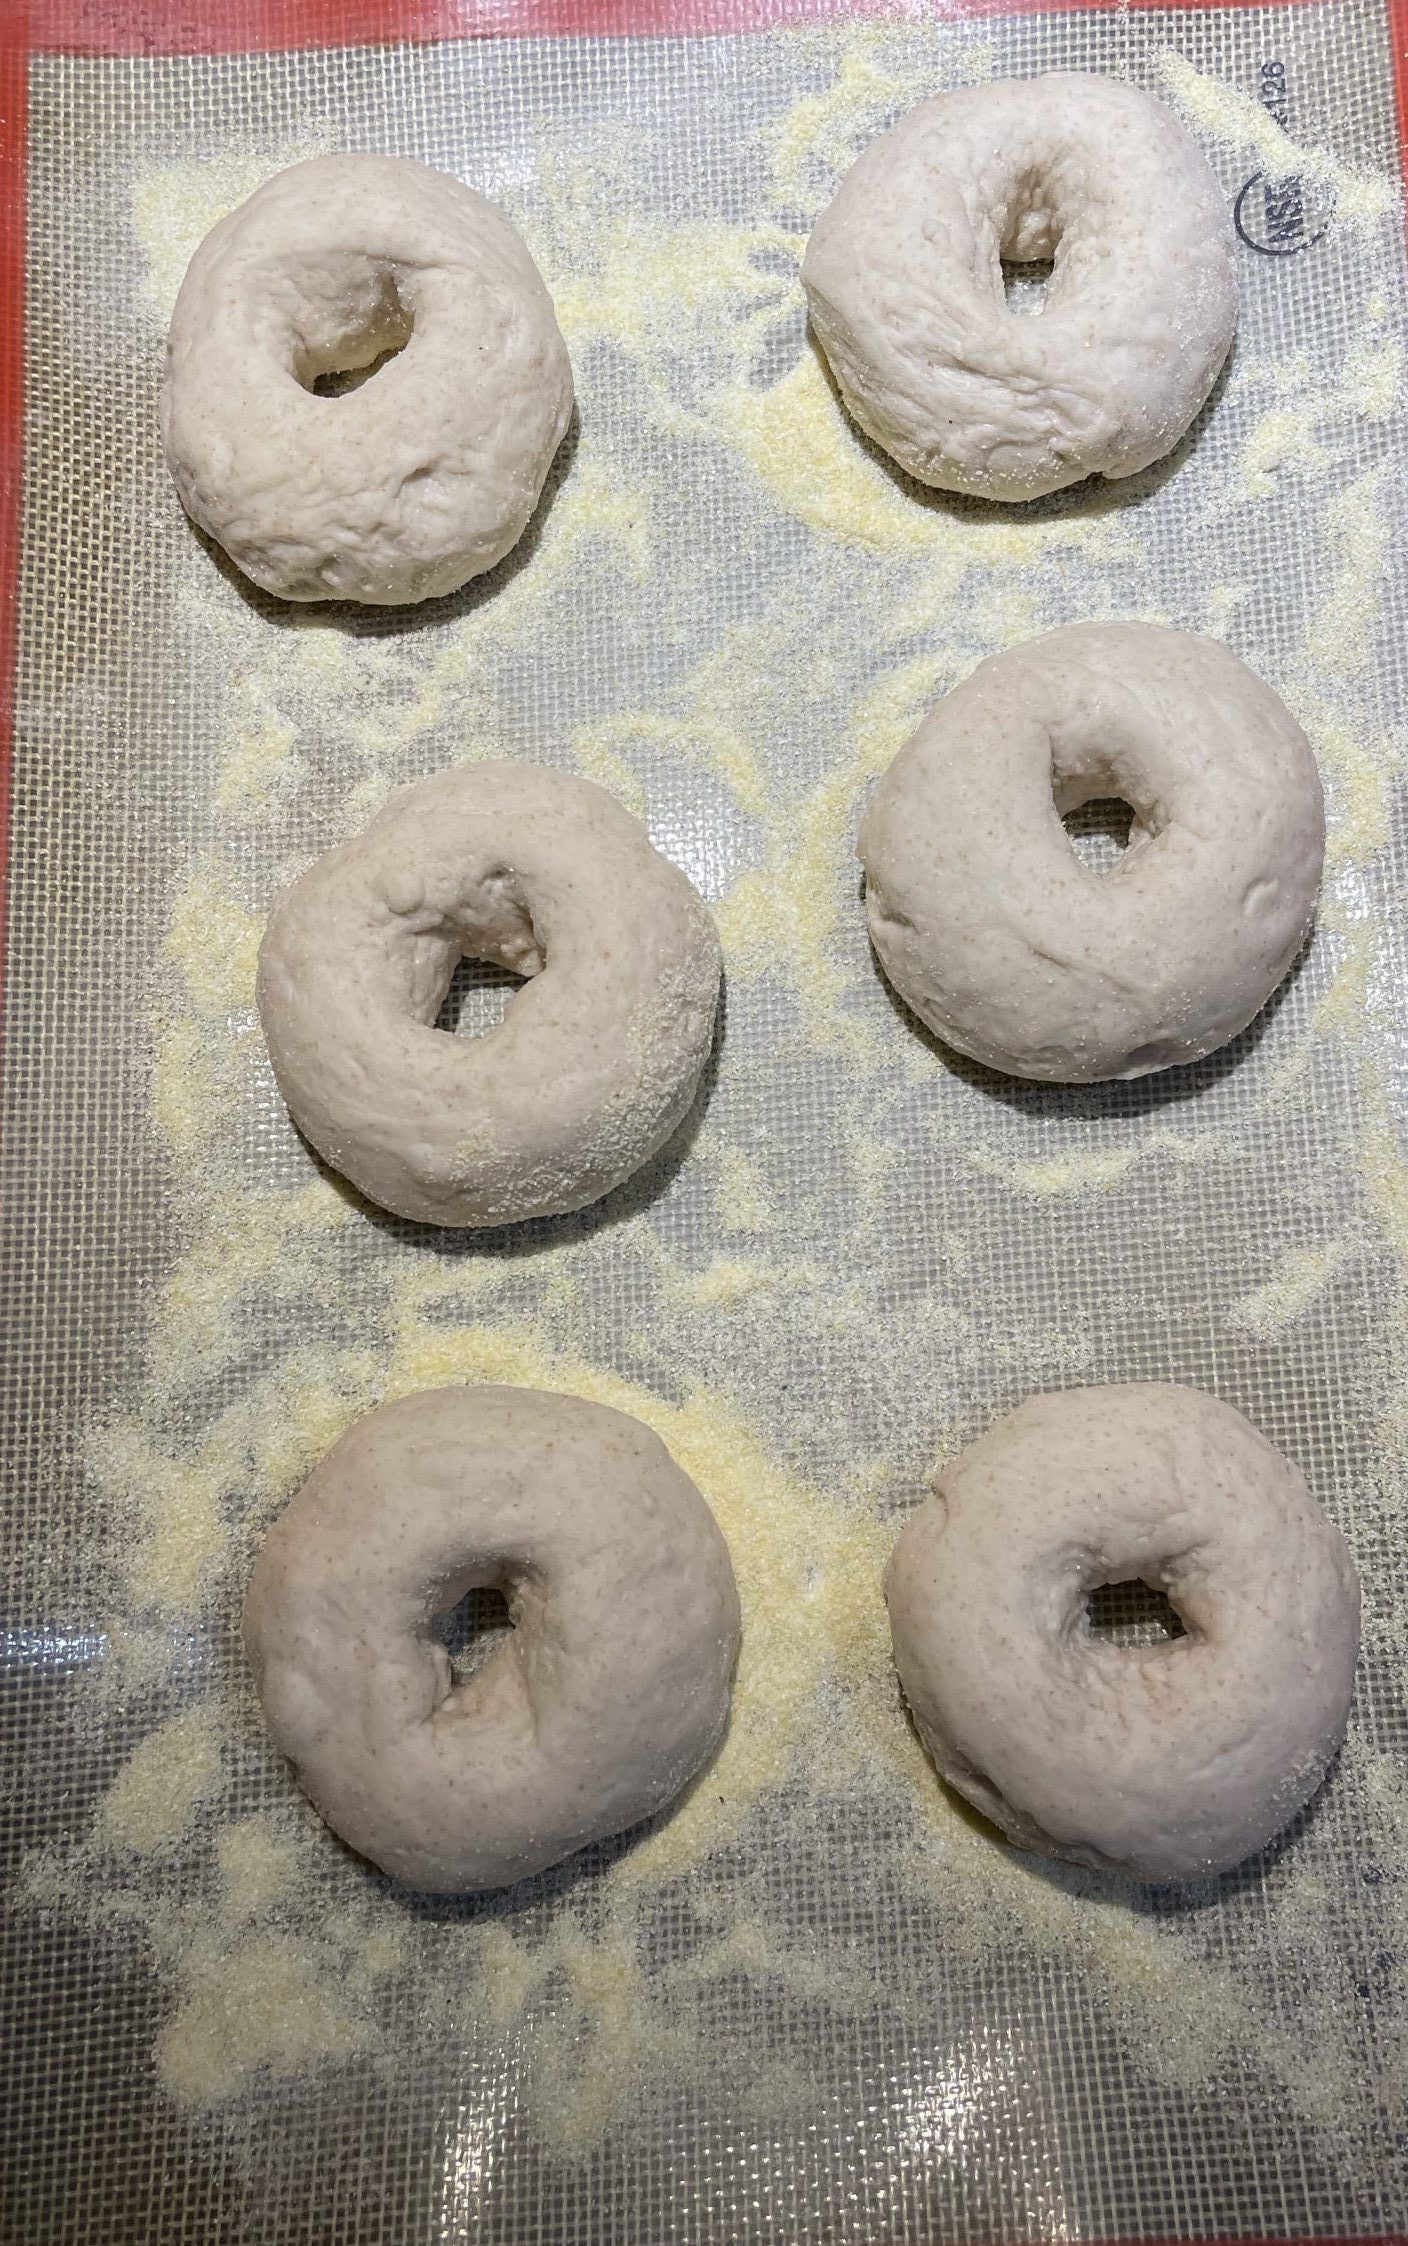 Bagels after proofing in refrigerator overnight.